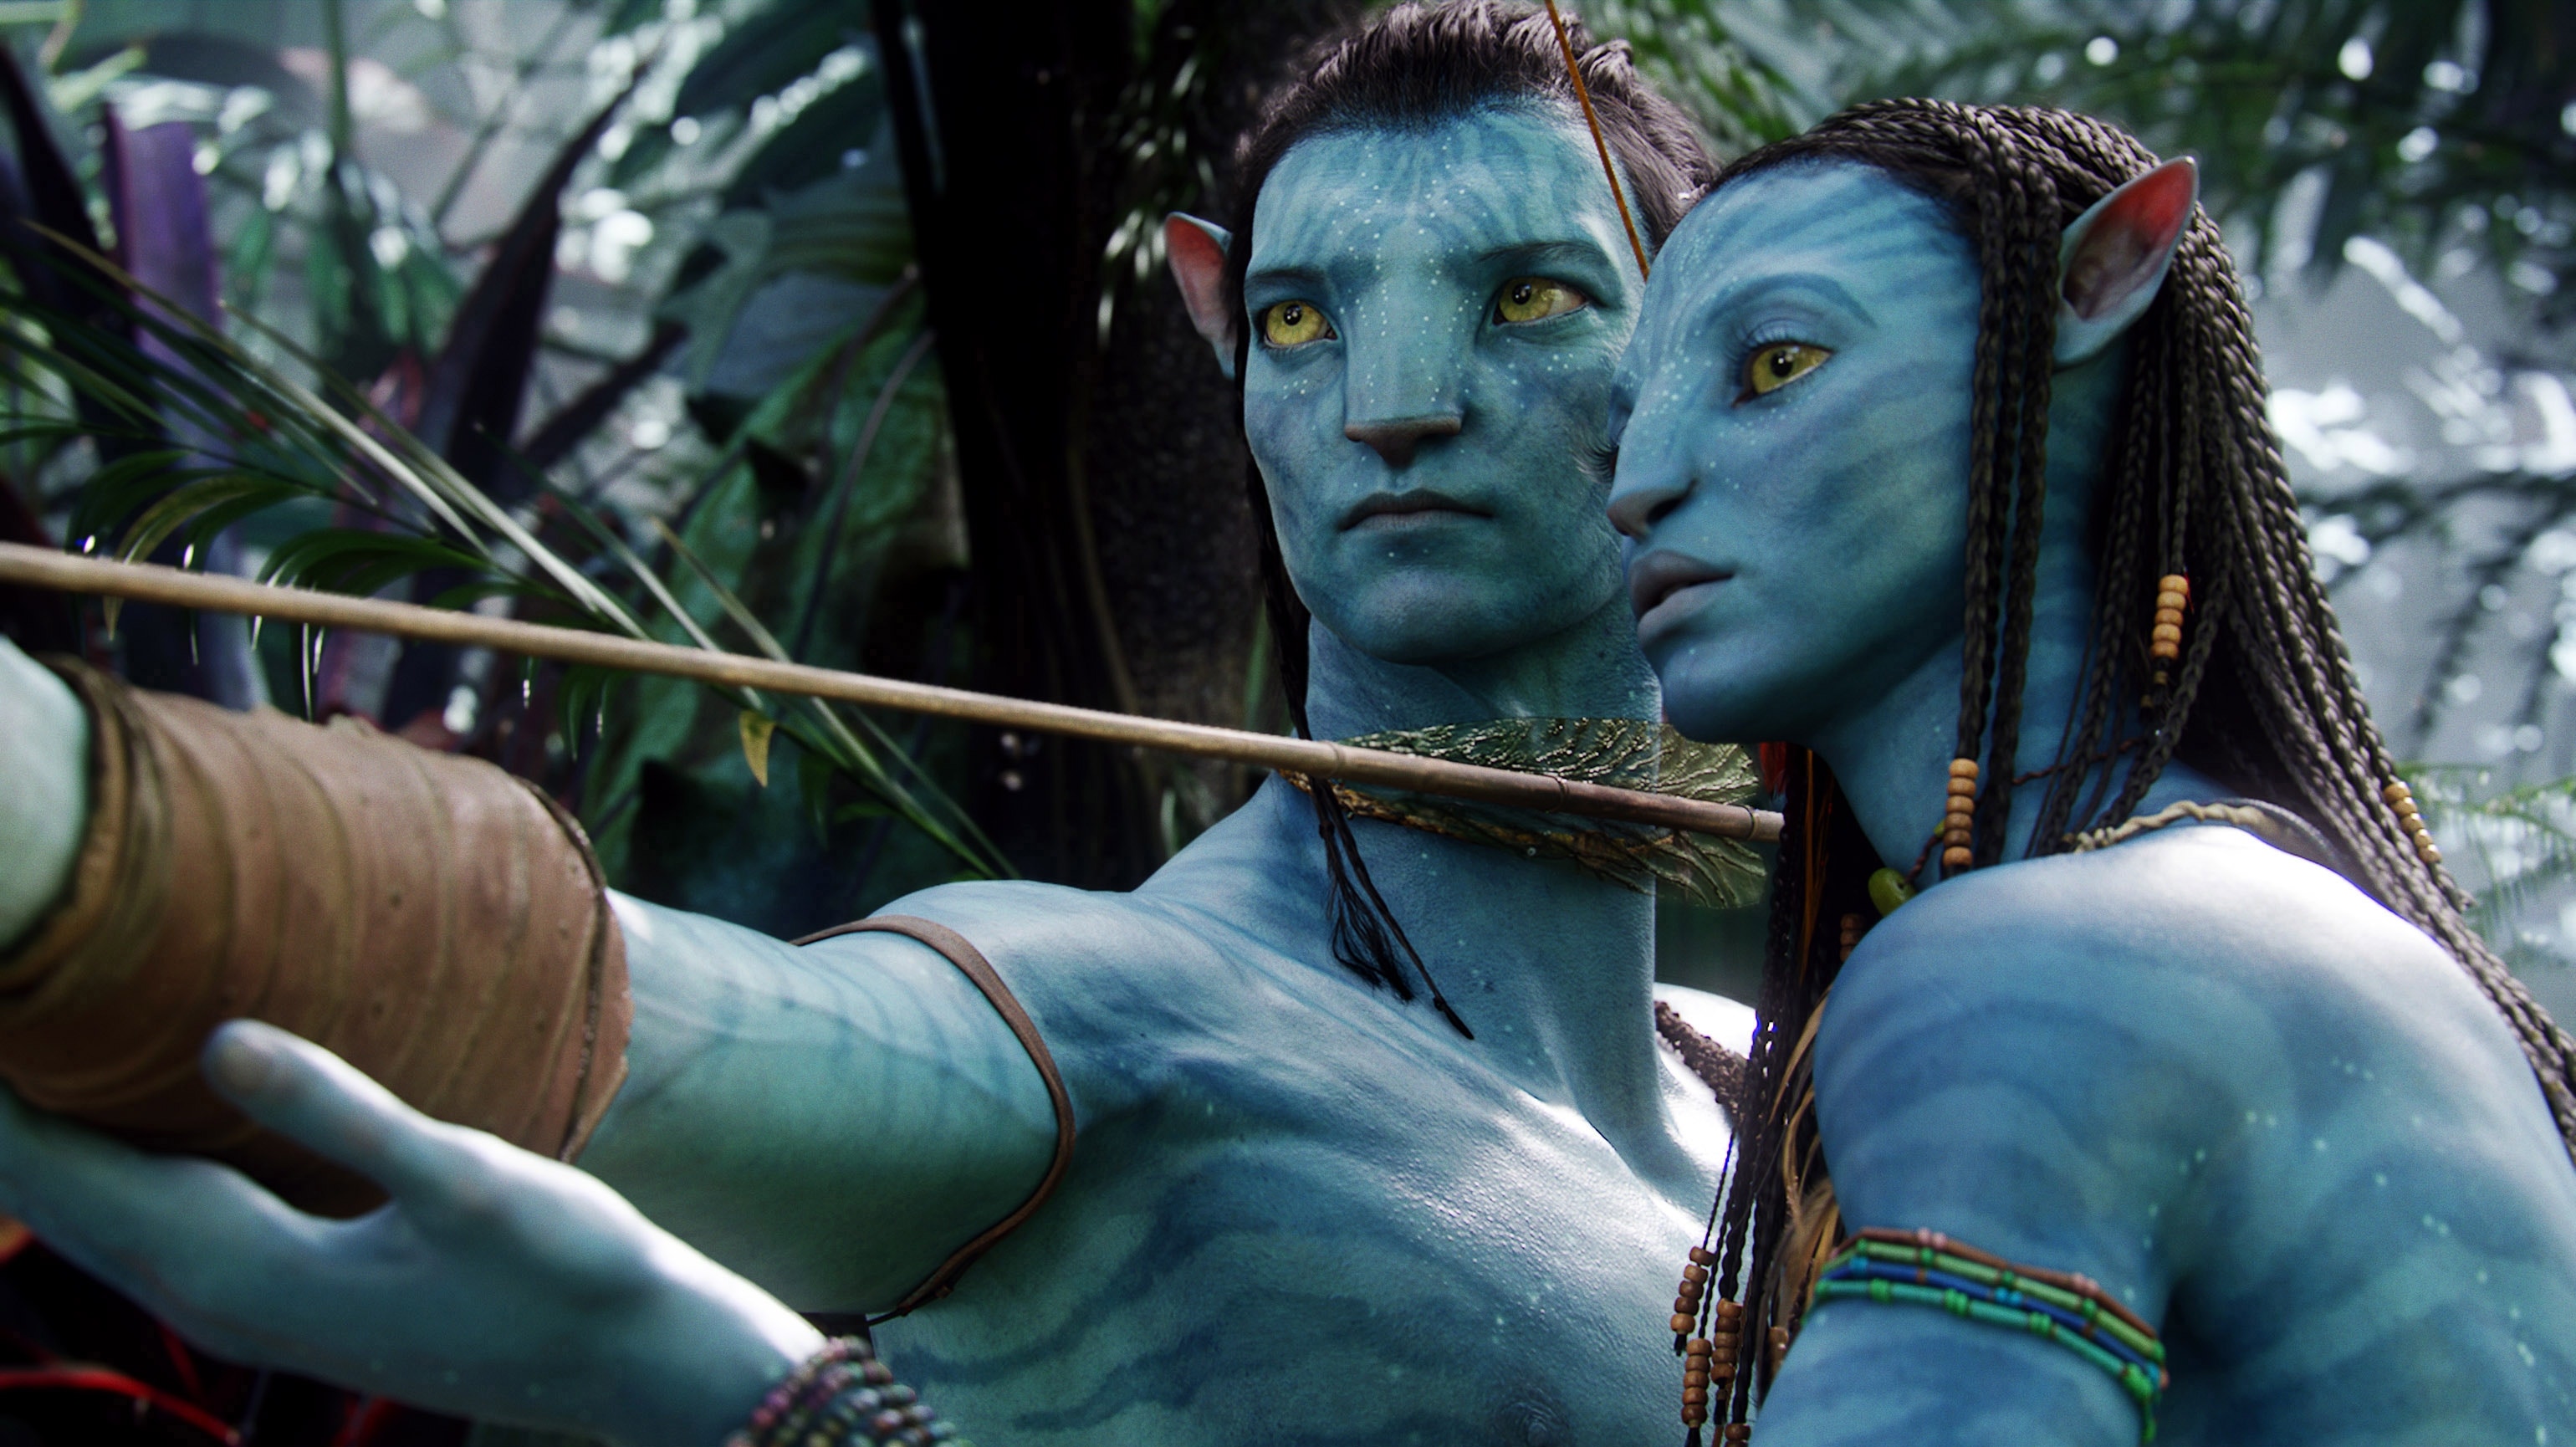 'Avatar' sequel accused of 'romanticizing' and 'glorifying' colonialism